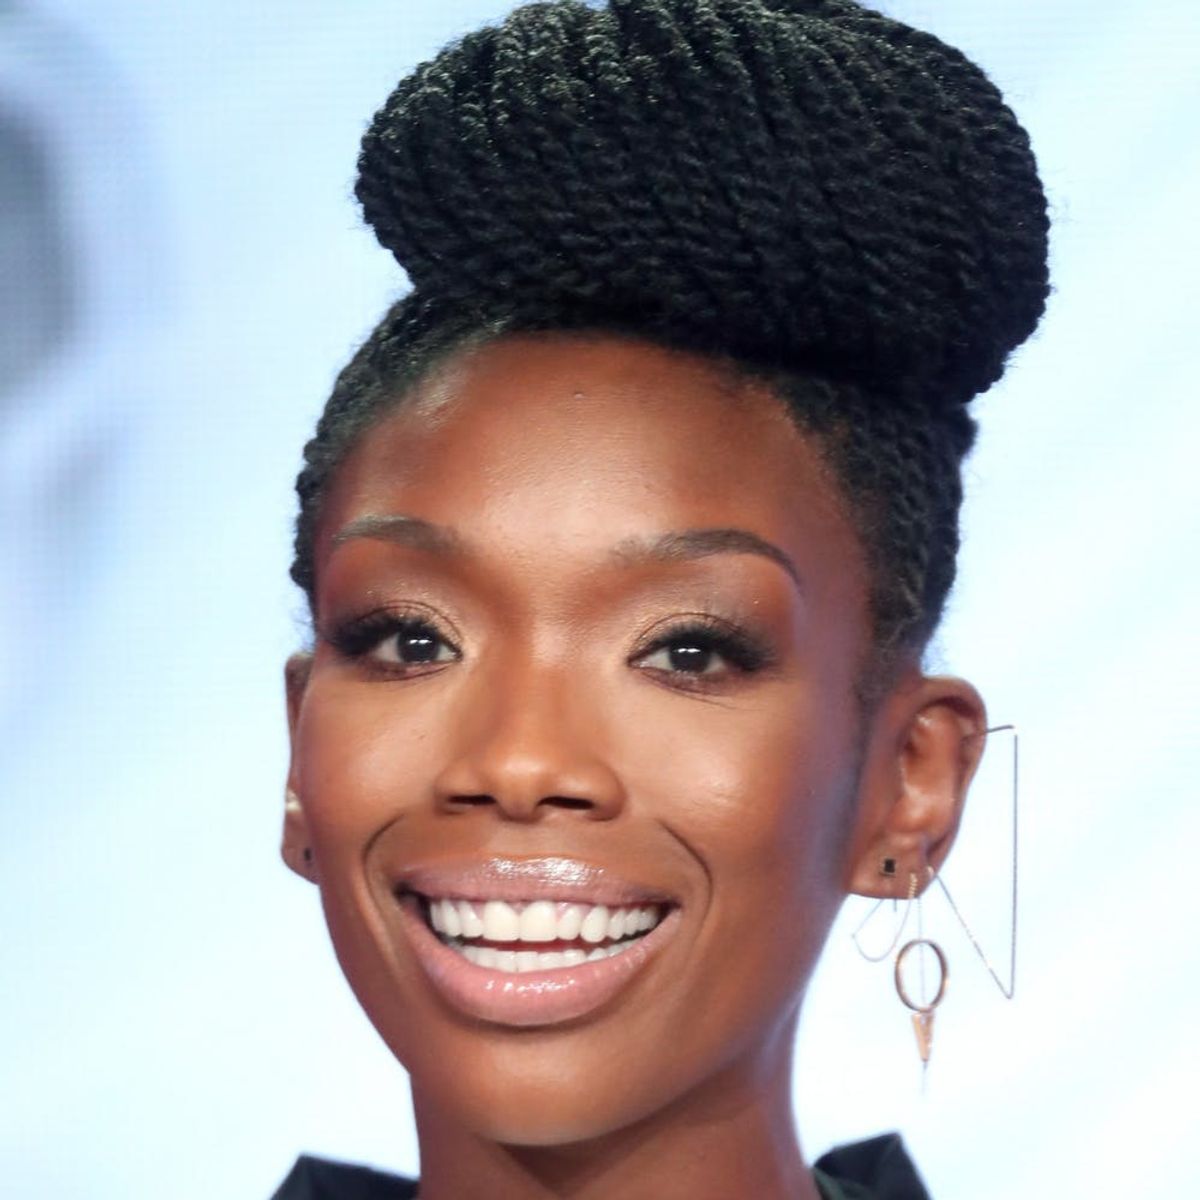 This Is the Scary Reason Brandy Just Passed Out on a Plane